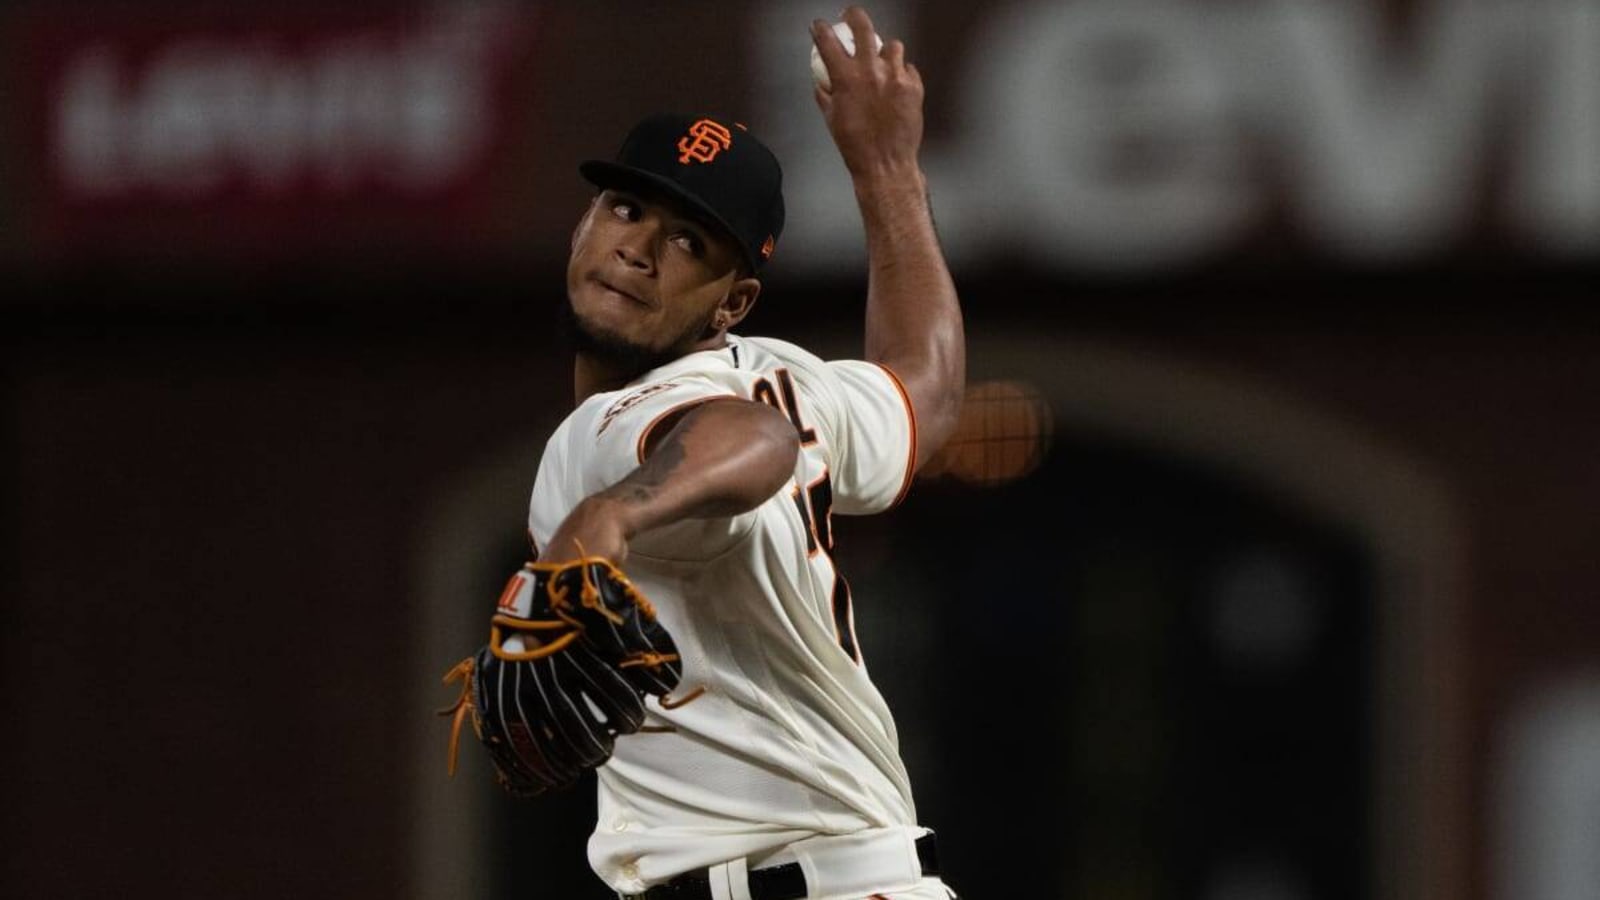  Giants closer Camilo Doval has an electric outing at WBC